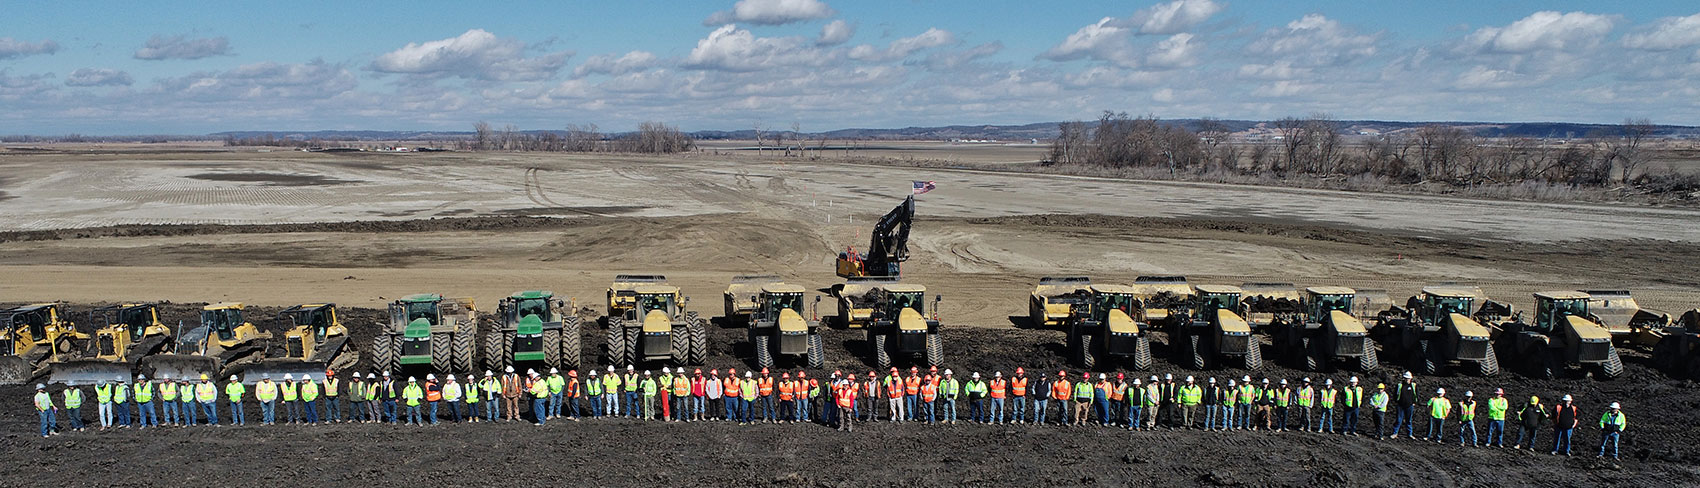 Ahtna workers and equipment lined up.